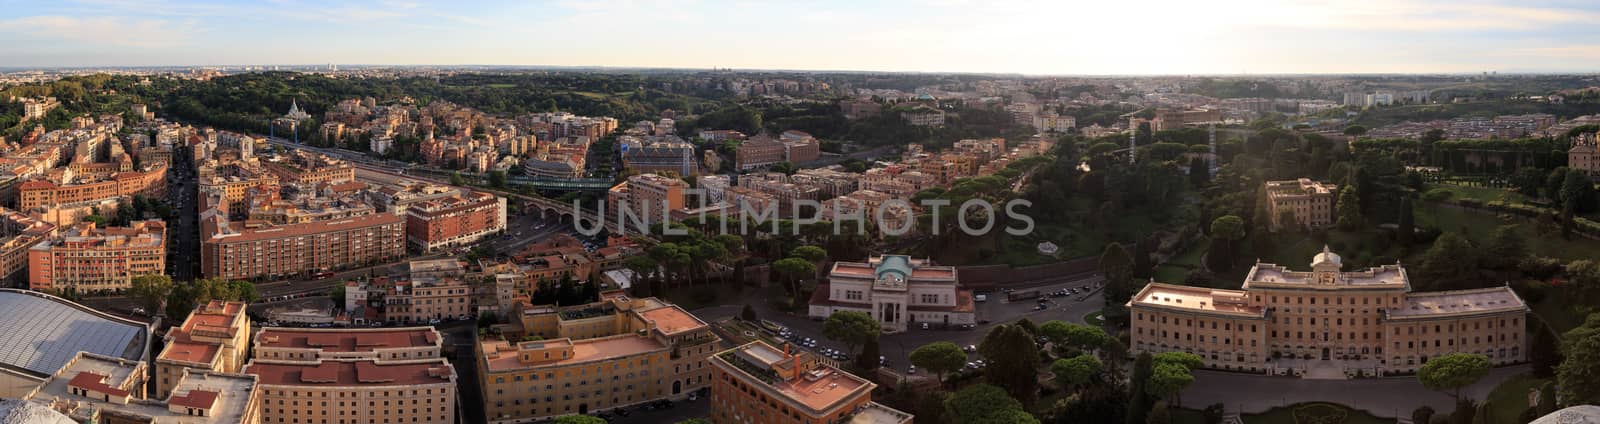 Top view of Vatican City from the dome of St. Peter's Basilica in Italy, on cloudy sky background.